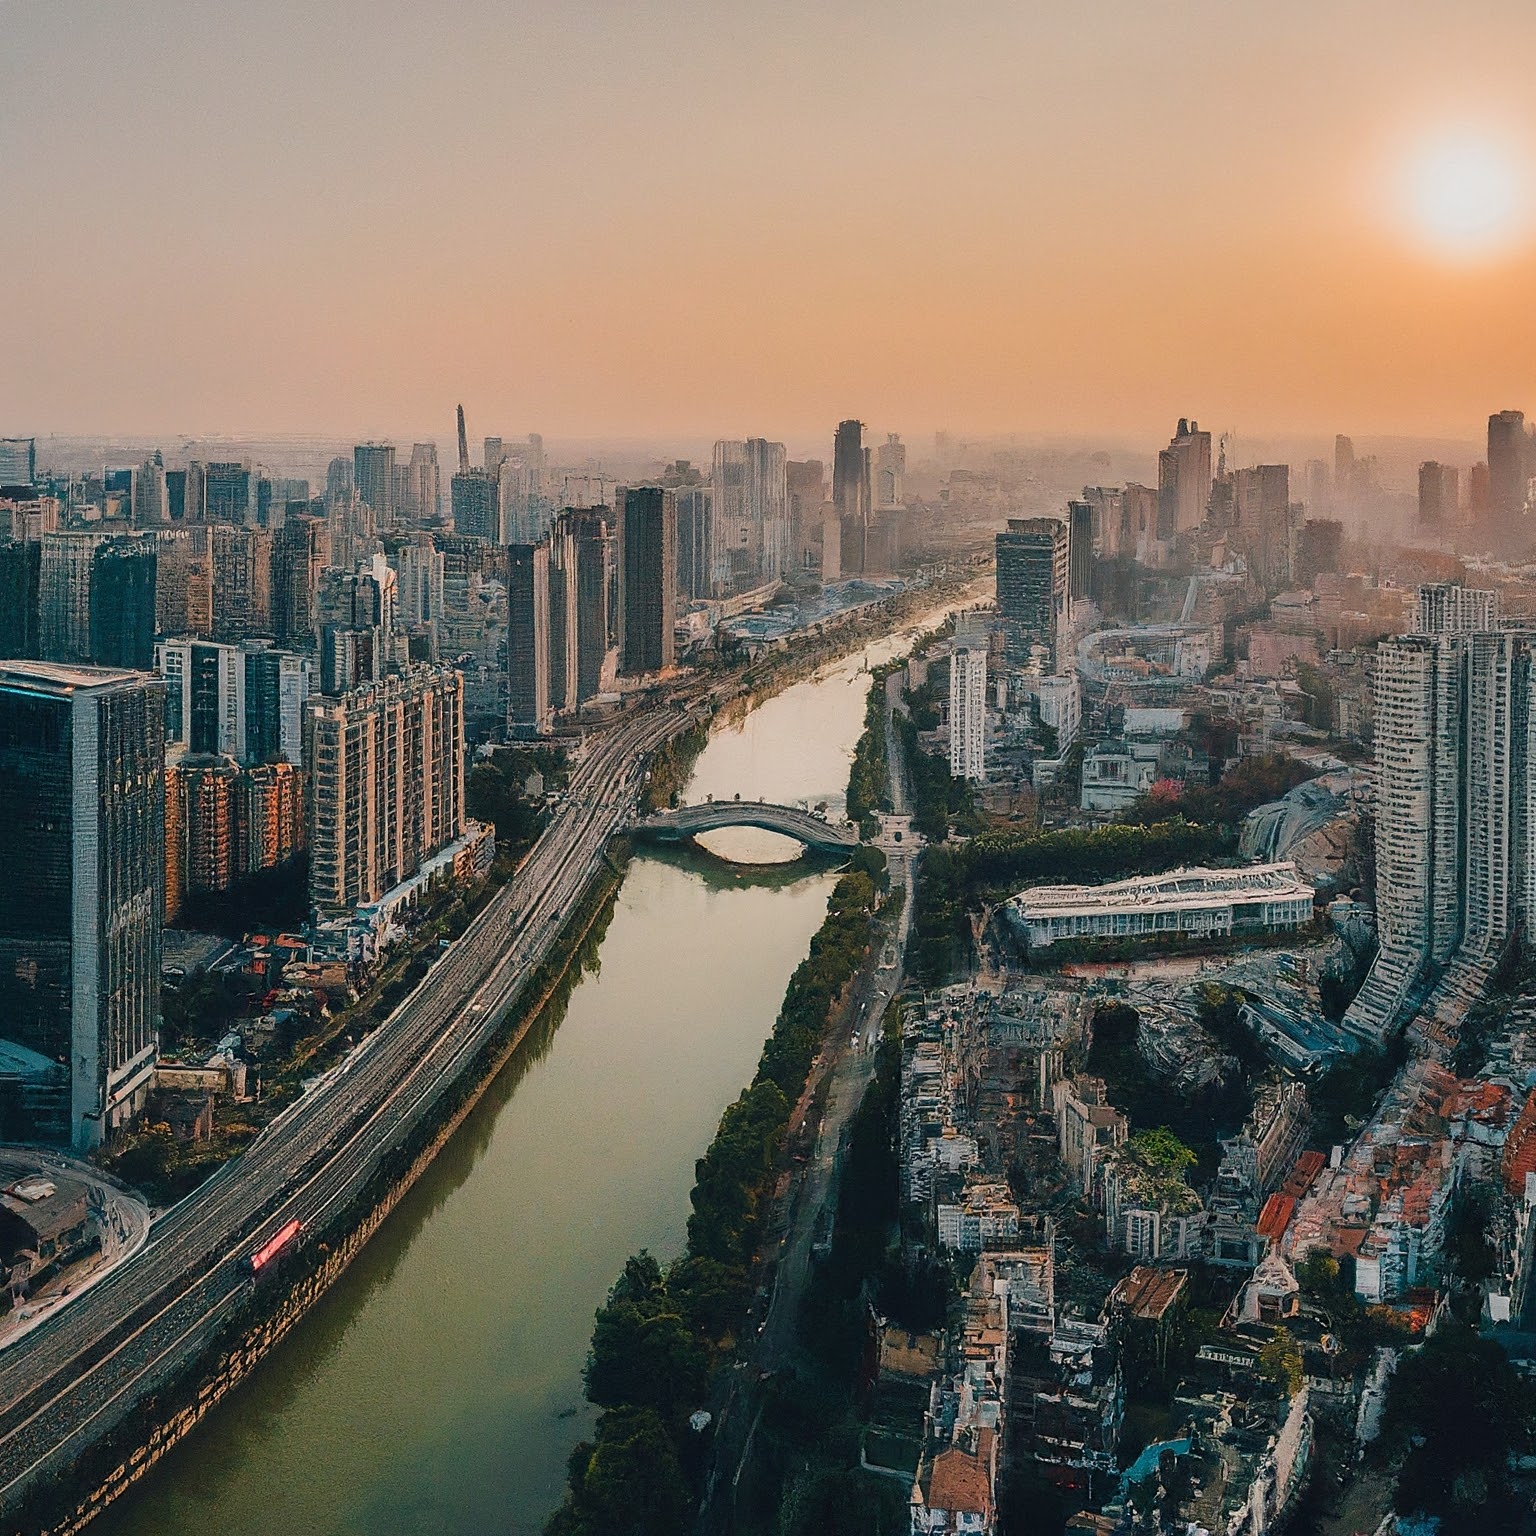 Panoramic view of Chengdu, China, at sunset, with modern cityscape and Jinjiang River.